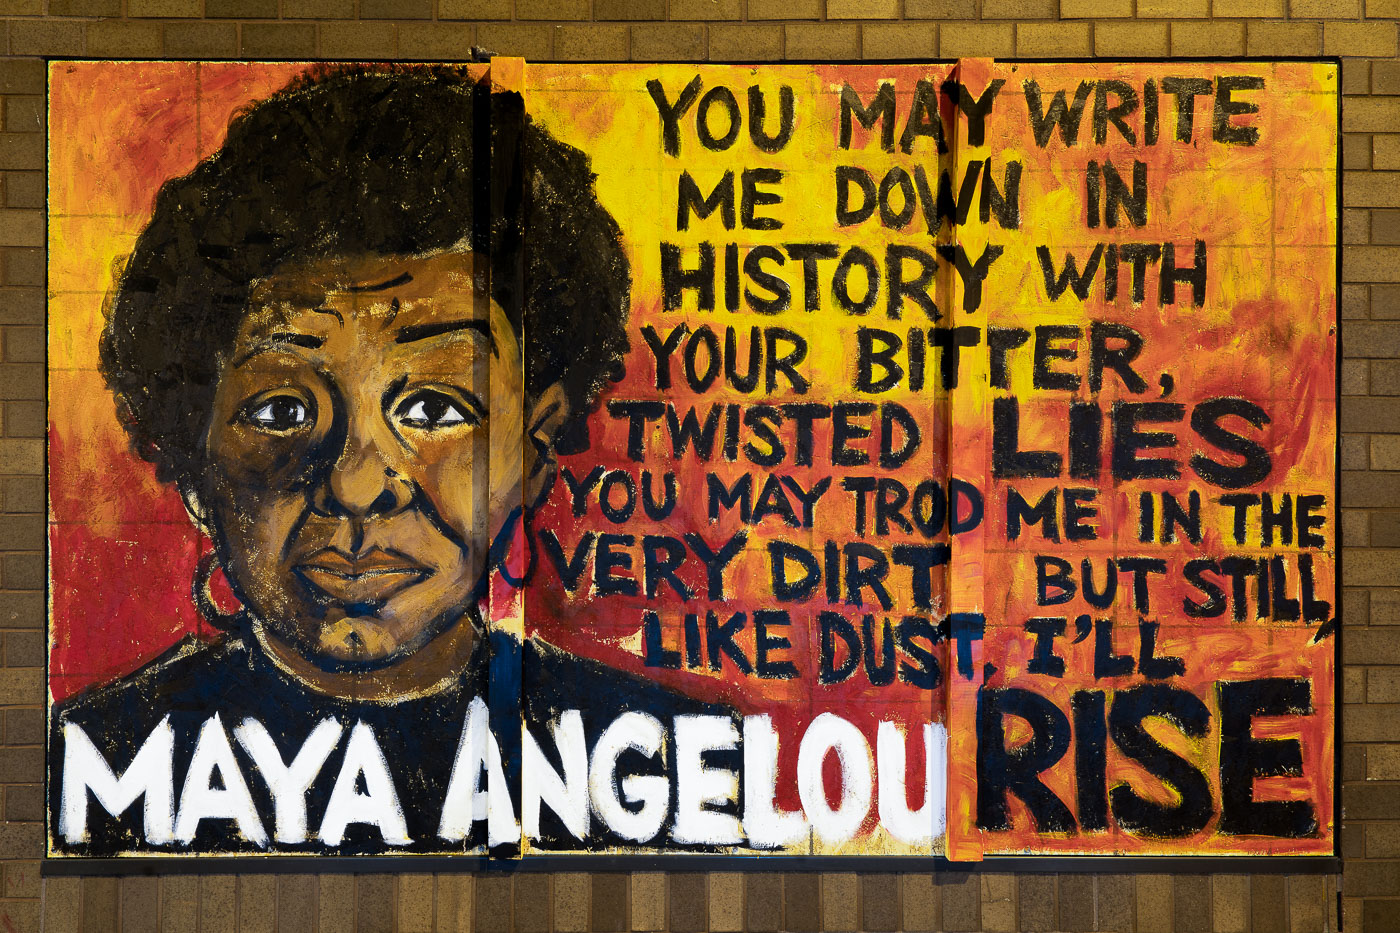 Maya Angelou quote on a painted mural